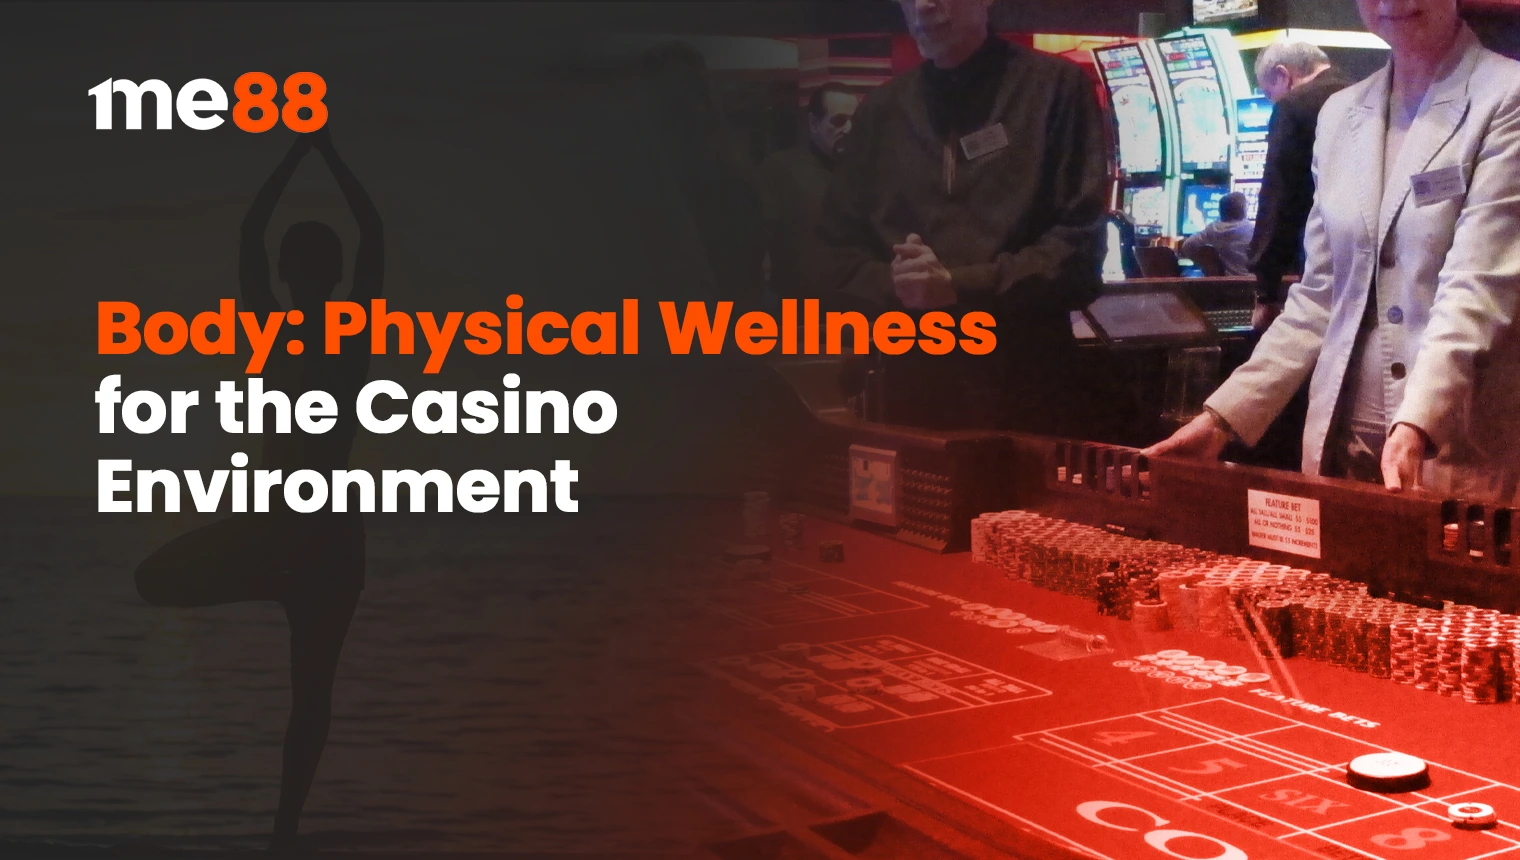 Body: Physical Wellness for the Casino Environment